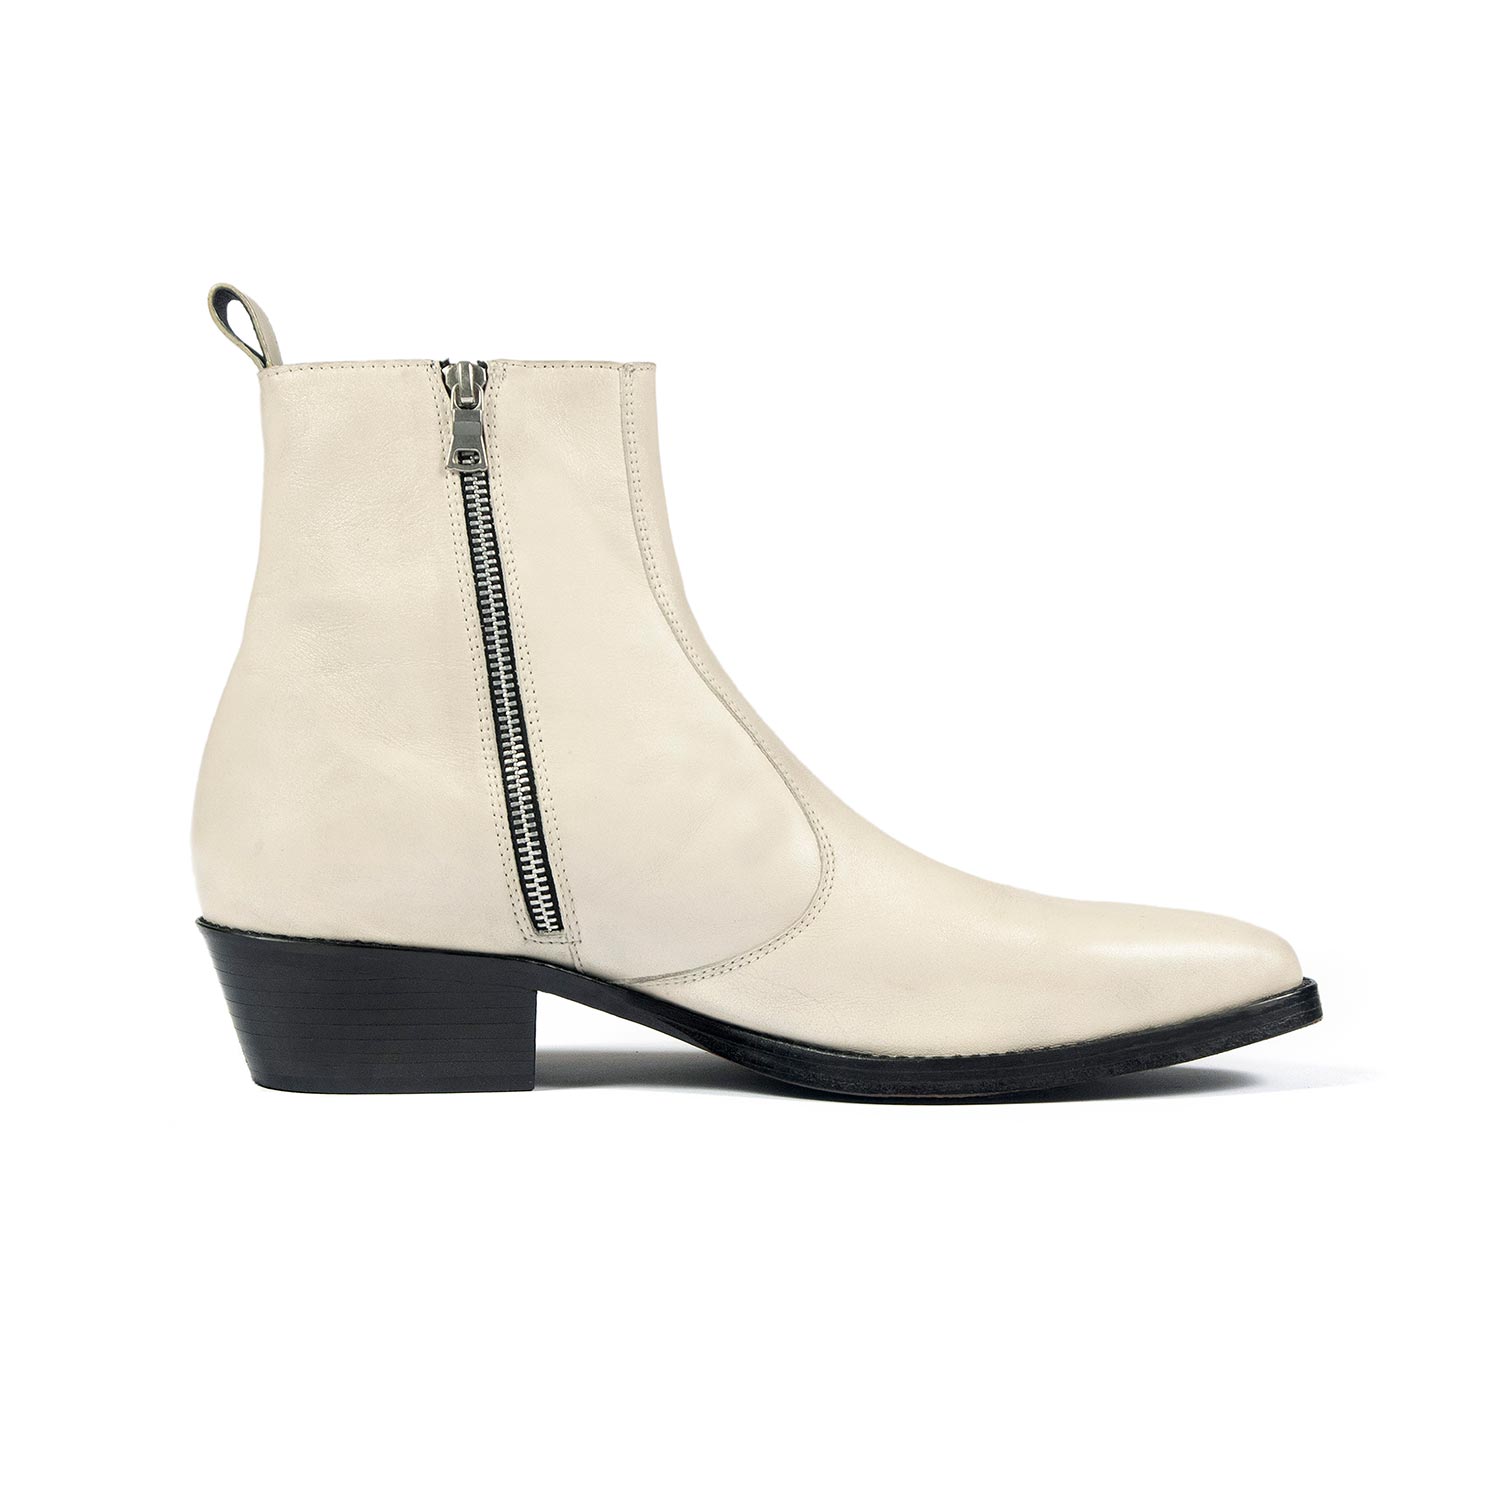 Richards - Cream Leather Zip Boot - Men's by Straight to Hell